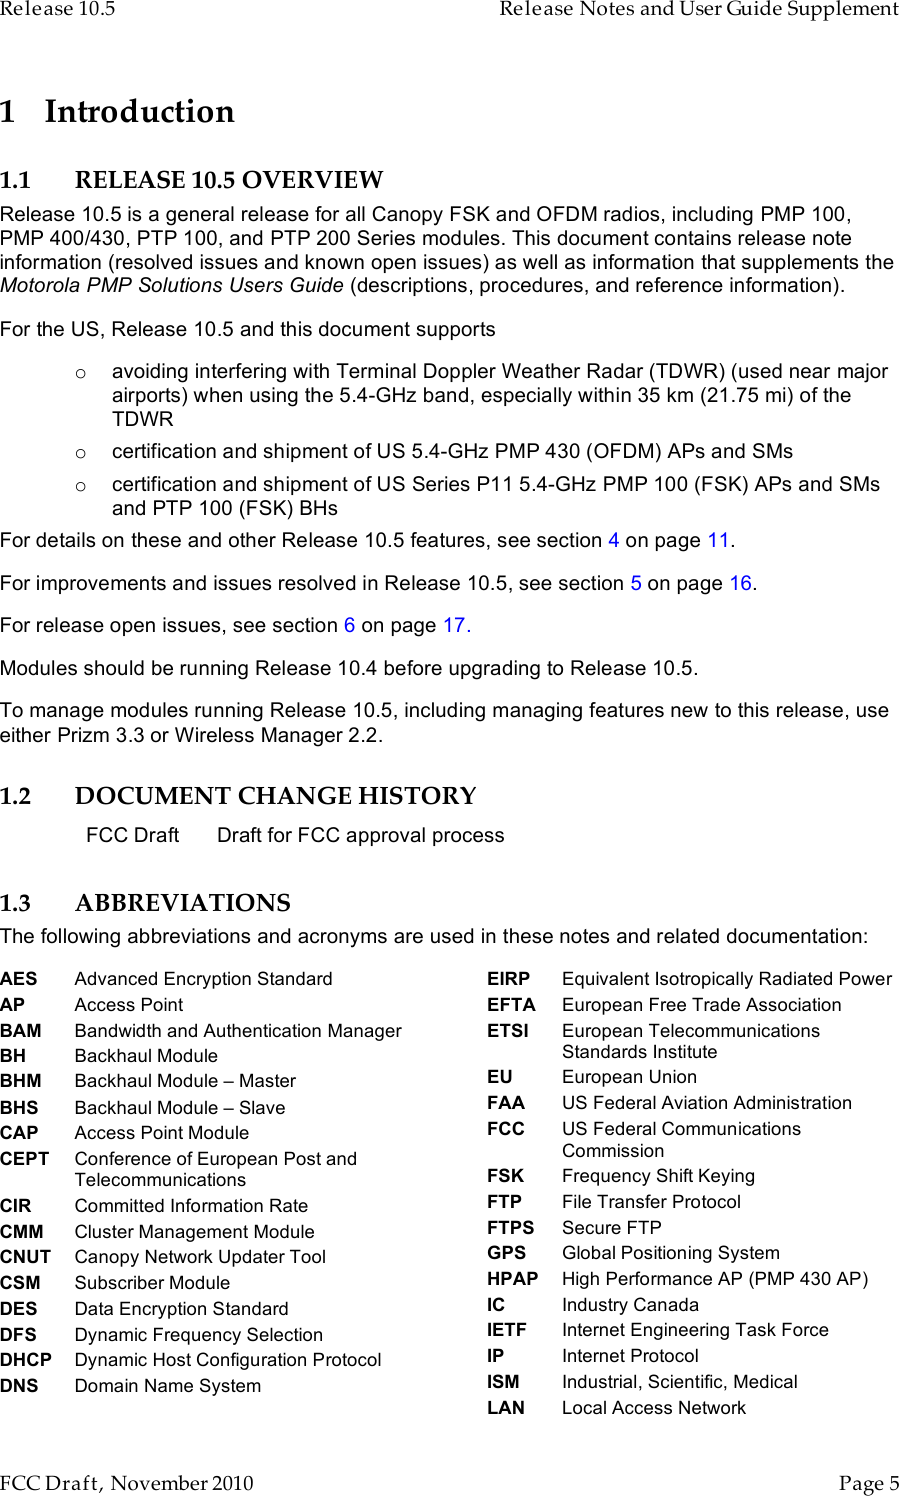 Release 10.5    Release Notes and User Guide Supplement      FCC Draft, November 2010  Page 5   1 Introduction 1.1 RELEASE 10.5 OVERVIEW Release 10.5 is a general release for all Canopy FSK and OFDM radios, including PMP 100, PMP 400/430, PTP 100, and PTP 200 Series modules. This document contains release note information (resolved issues and known open issues) as well as information that supplements the Motorola PMP Solutions Users Guide (descriptions, procedures, and reference information). For the US, Release 10.5 and this document supports o avoiding interfering with Terminal Doppler Weather Radar (TDWR) (used near major airports) when using the 5.4-GHz band, especially within 35 km (21.75 mi) of the TDWR o certification and shipment of US 5.4-GHz PMP 430 (OFDM) APs and SMs o certification and shipment of US Series P11 5.4-GHz PMP 100 (FSK) APs and SMs and PTP 100 (FSK) BHs For details on these and other Release 10.5 features, see section 4 on page 11. For improvements and issues resolved in Release 10.5, see section 5 on page 16. For release open issues, see section 6 on page 17. Modules should be running Release 10.4 before upgrading to Release 10.5. To manage modules running Release 10.5, including managing features new to this release, use either Prizm 3.3 or Wireless Manager 2.2. 1.2 DOCUMENT CHANGE HISTORY FCC Draft Draft for FCC approval process 1.3 ABBREVIATIONS The following abbreviations and acronyms are used in these notes and related documentation:AES Advanced Encryption Standard AP Access Point BAM Bandwidth and Authentication Manager BH Backhaul Module BHM Backhaul Module – Master  BHS Backhaul Module – Slave CAP Access Point Module CEPT Conference of European Post and Telecommunications CIR Committed Information Rate CMM Cluster Management Module CNUT Canopy Network Updater Tool CSM Subscriber Module DES Data Encryption Standard DFS Dynamic Frequency Selection DHCP Dynamic Host Configuration Protocol DNS Domain Name System EIRP Equivalent Isotropically Radiated Power EFTA European Free Trade Association ETSI European Telecommunications Standards Institute EU European Union FAA US Federal Aviation Administration FCC US Federal Communications Commission FSK Frequency Shift Keying FTP File Transfer Protocol FTPS Secure FTP GPS Global Positioning System HPAP High Performance AP (PMP 430 AP) IC Industry Canada IETF Internet Engineering Task Force IP Internet Protocol ISM Industrial, Scientific, Medical LAN Local Access Network 